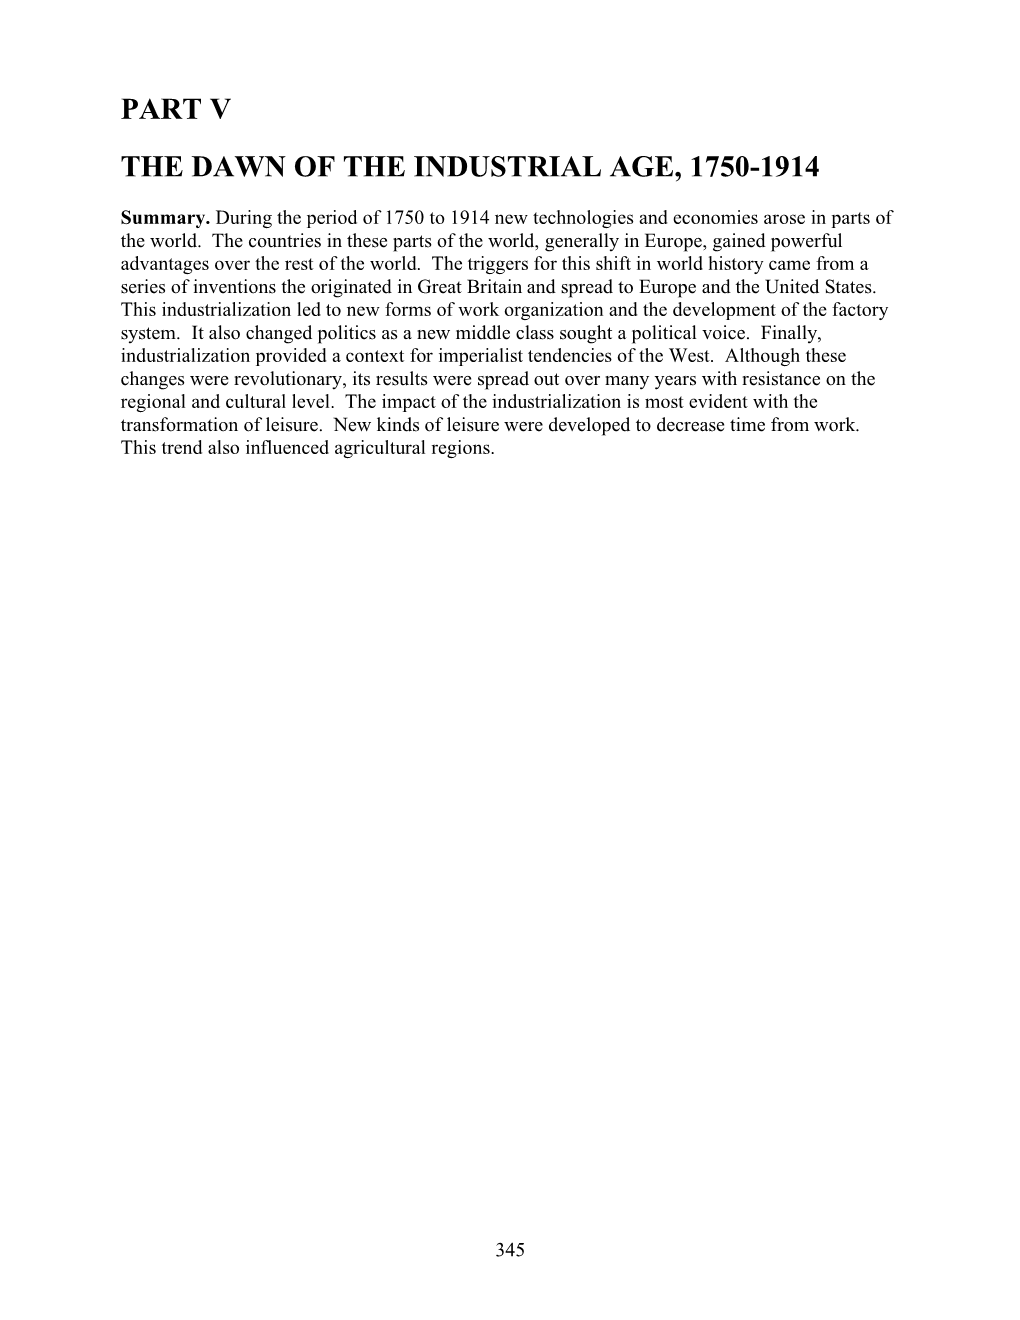 Part V the Dawn of the Industrial Age, 1750-1914